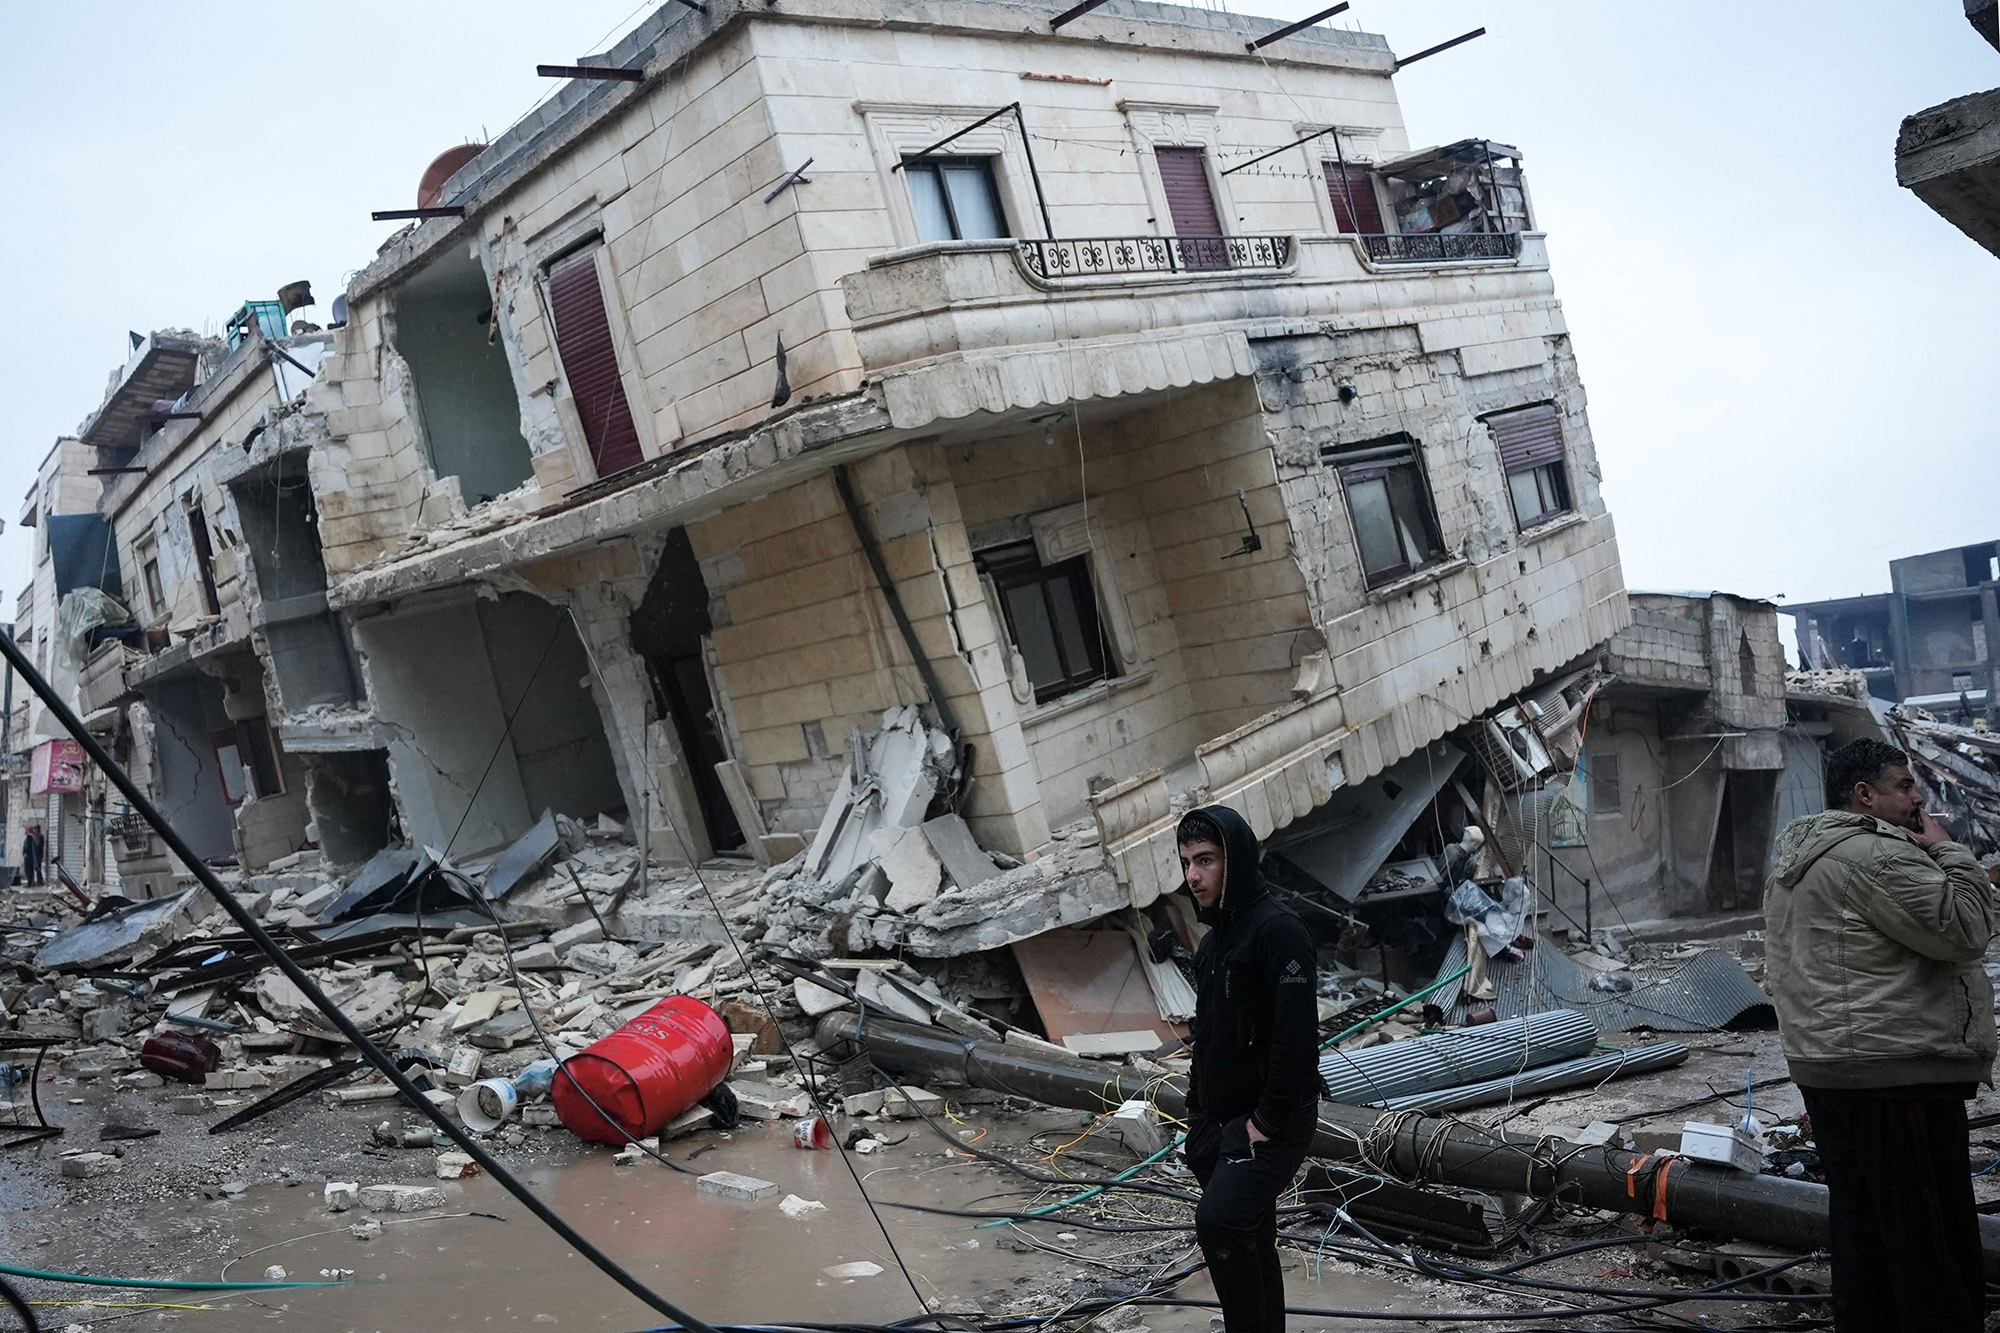 Residents stand in front of a collapsed building following an earthquake in the town of Jandaris, Syria, on February 6.